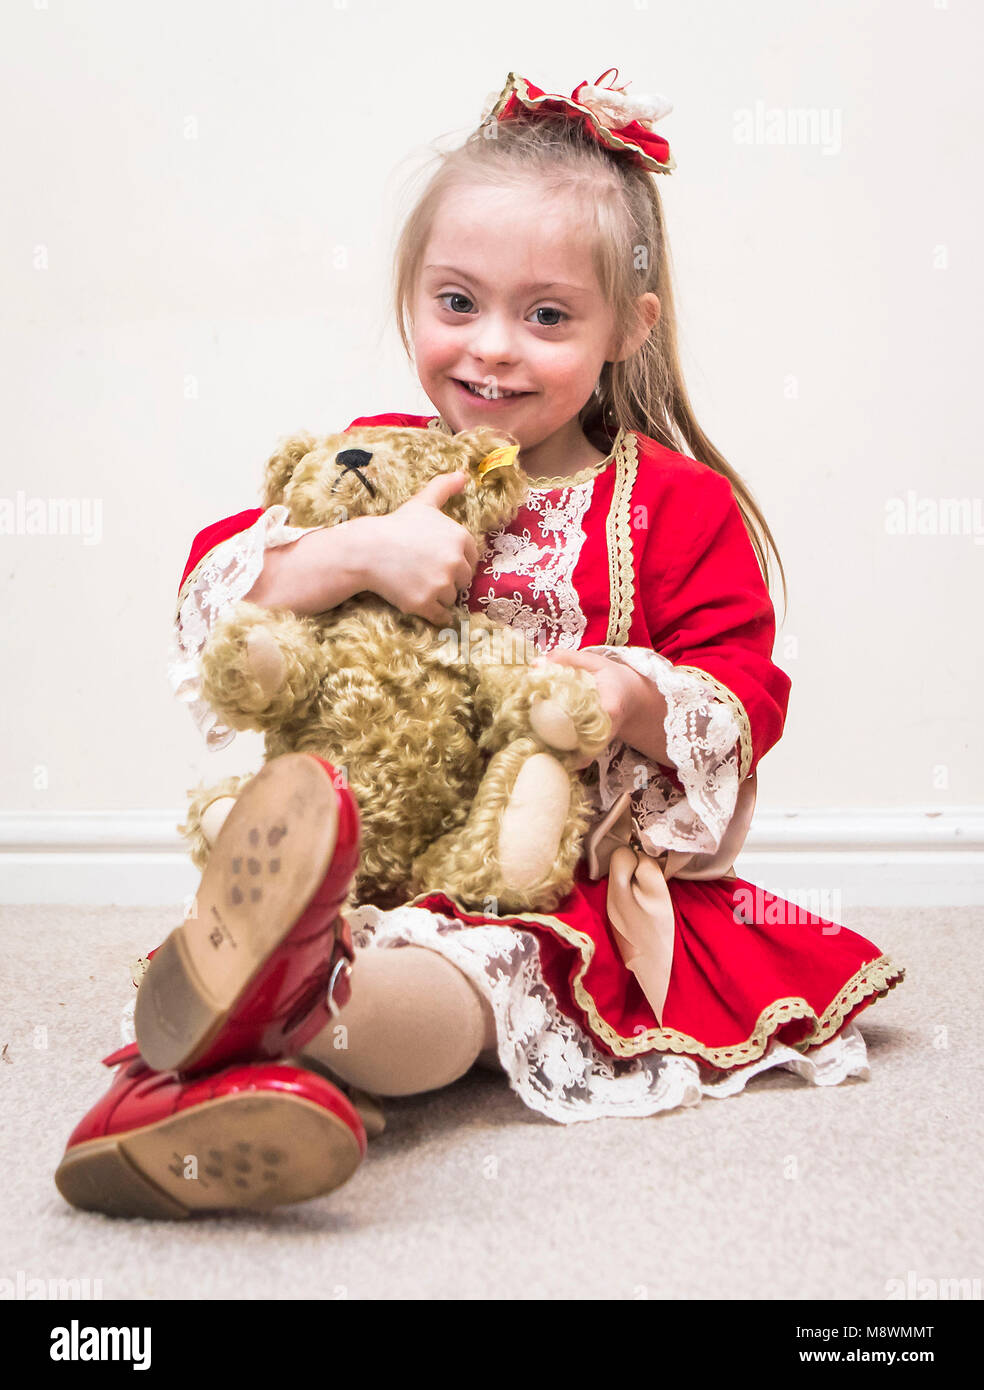 Connie-Rose Seabourne who has Downs Syndrome, at her home in Leeds, after she appeared on a James Corden backed carpool karaoke video that has gone viral with over a million of views. Stock Photo